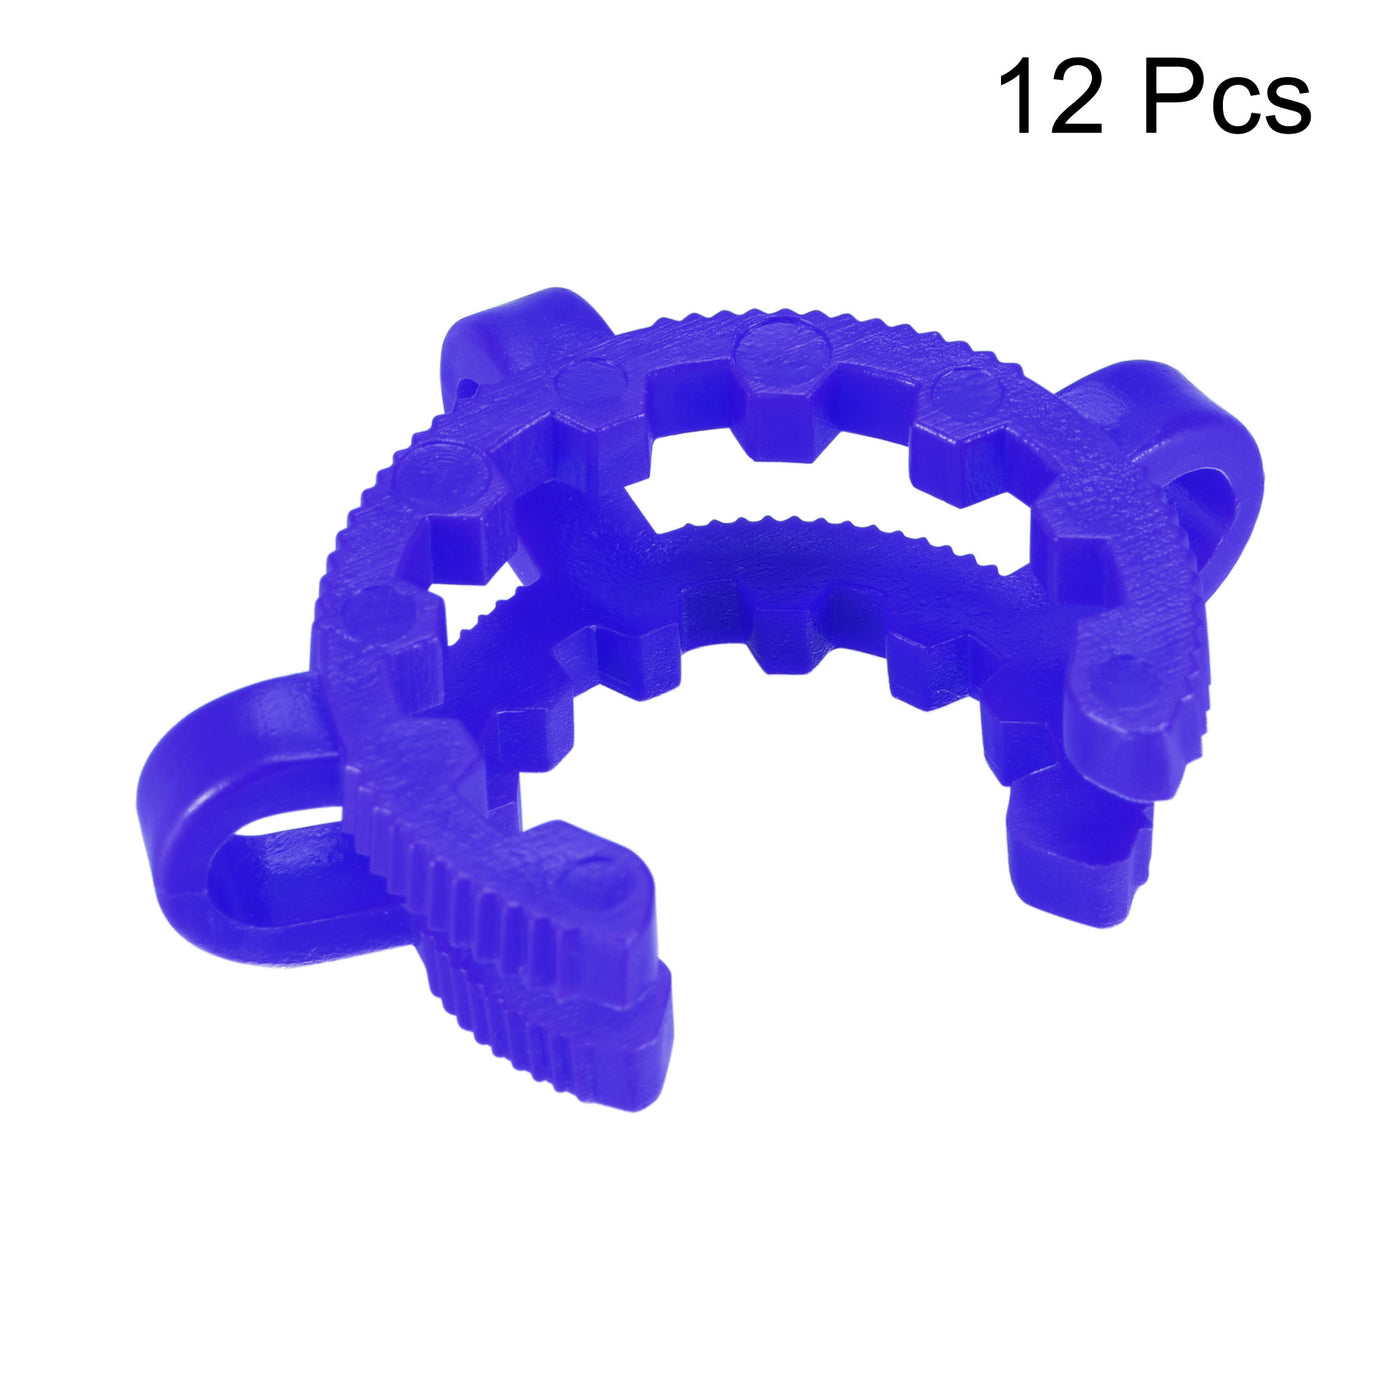 Uxcell Uxcell Lab Joint Clip Plastic Clamp Mounting Clips for 14/20 or 14/35 Glass Taper Joints Laboratory Connector Blue 12Pcs